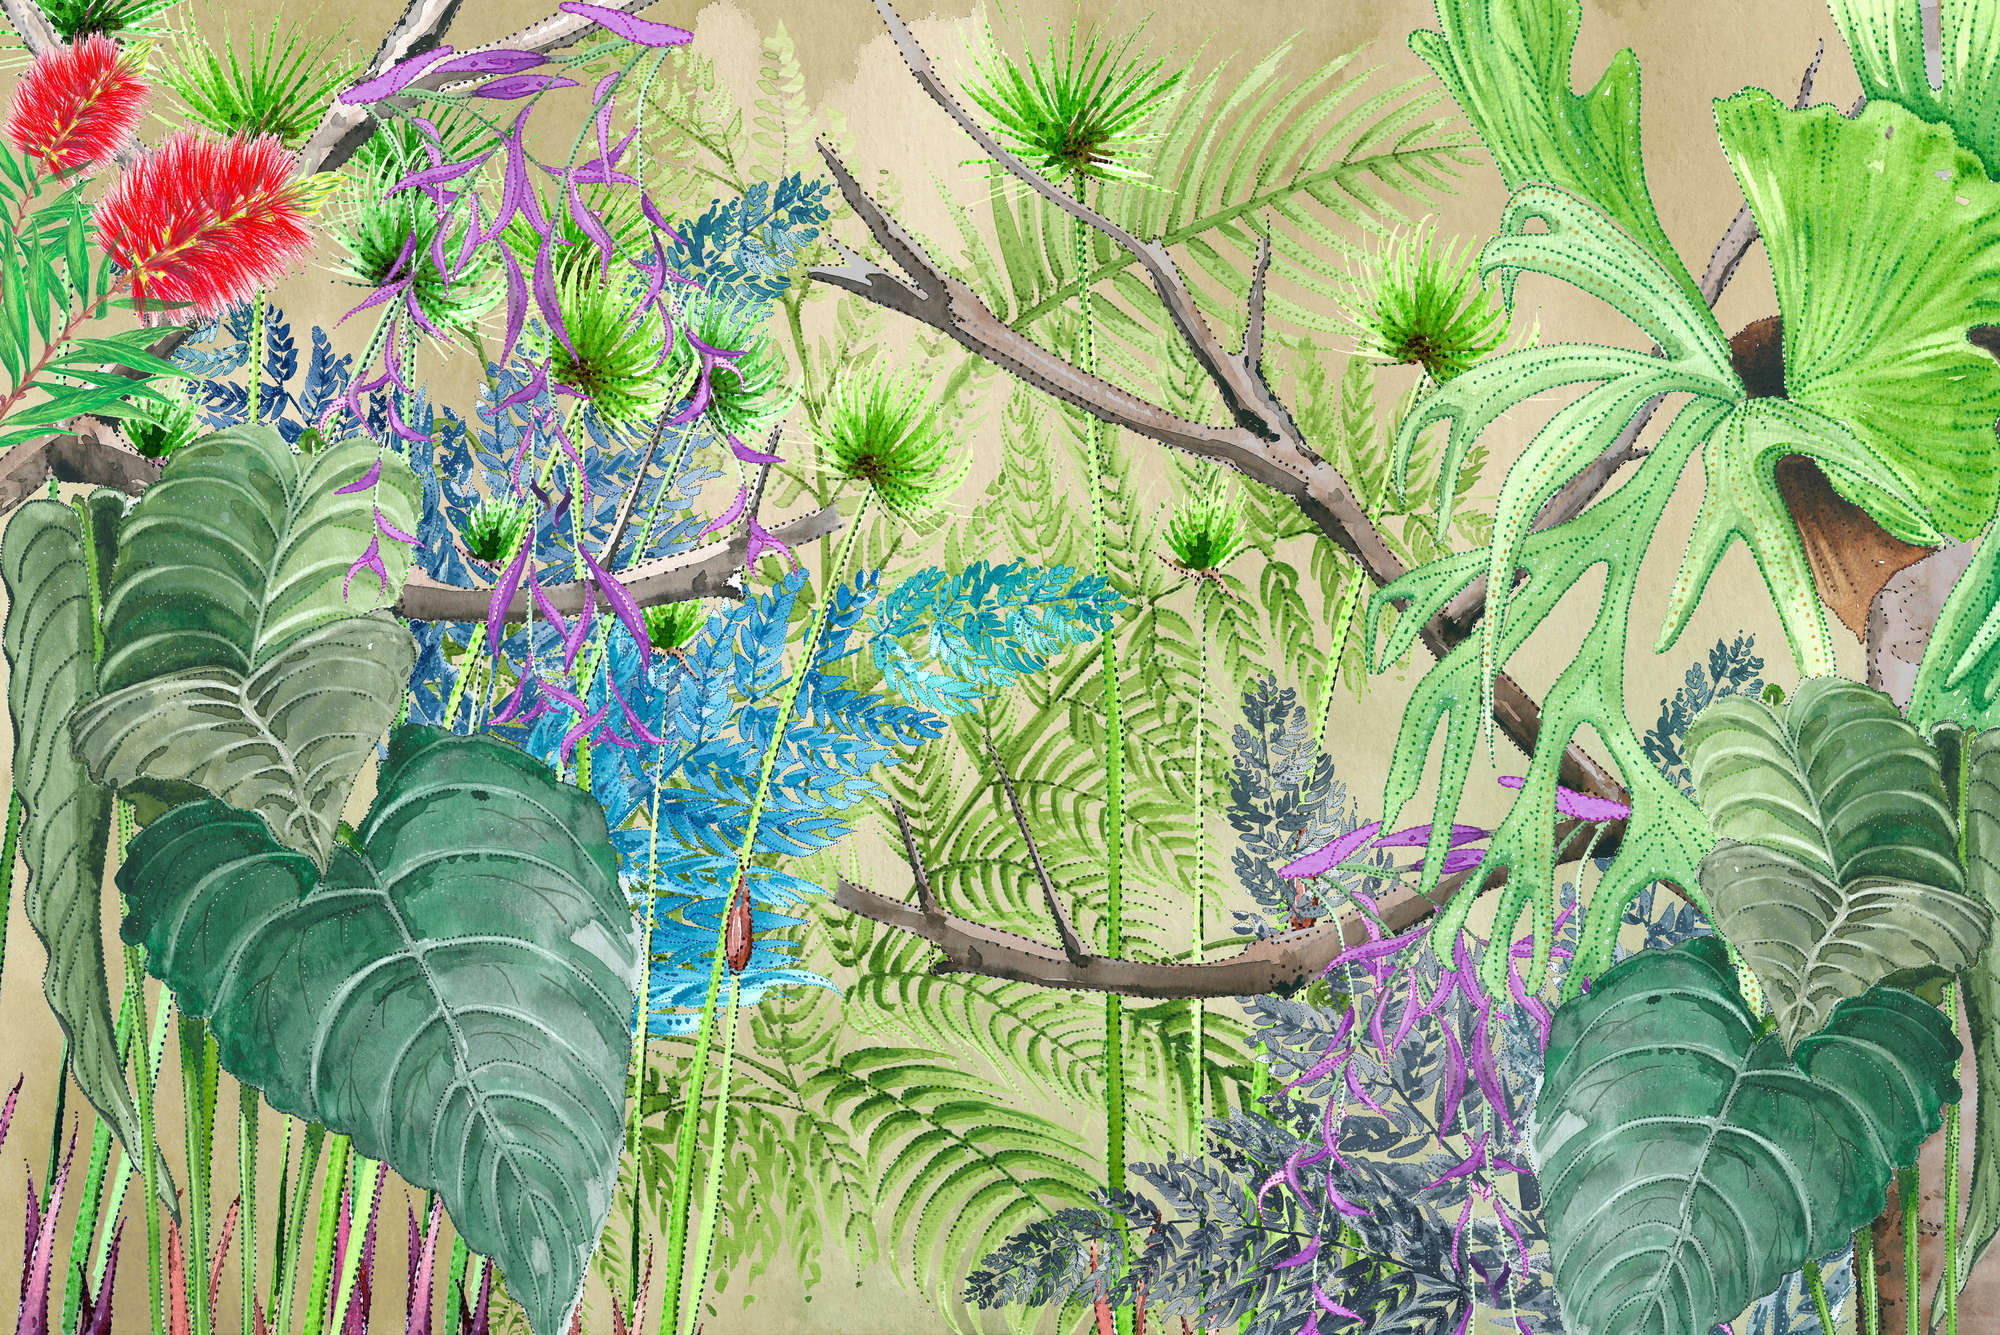             Jungle mural with flowers in blue and green on premium smooth vinyl
        